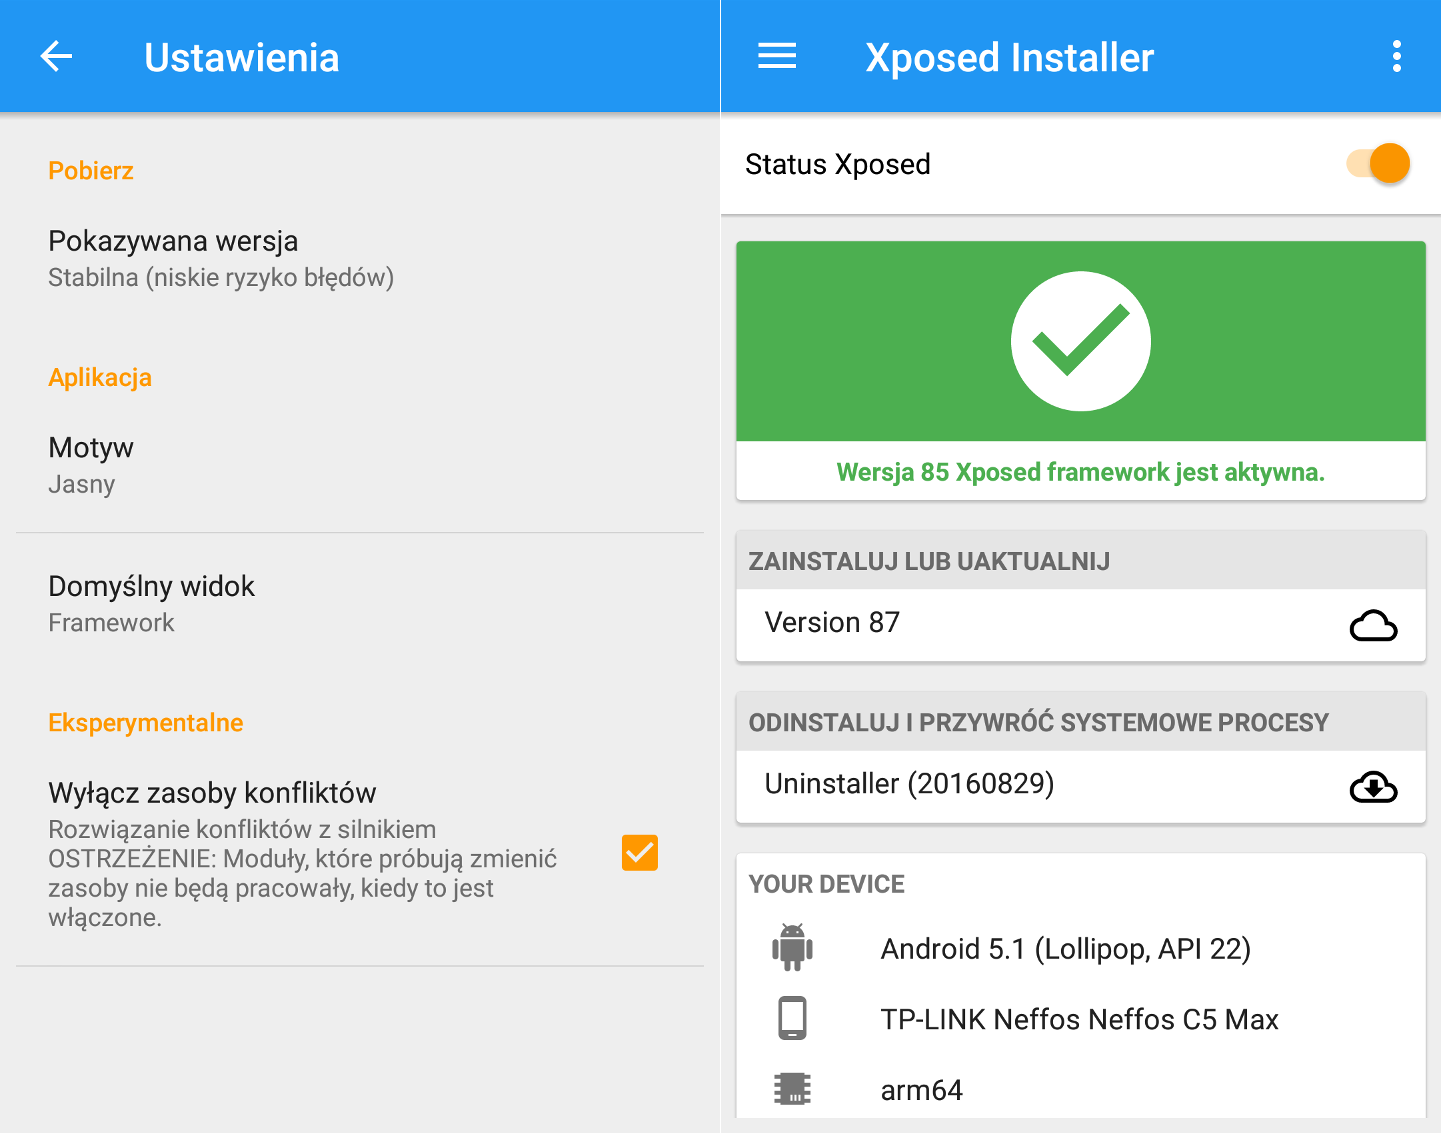 xposed-android-lollipop-marshmalow-tp-link-smartfon-neffos-c5-max-opcje